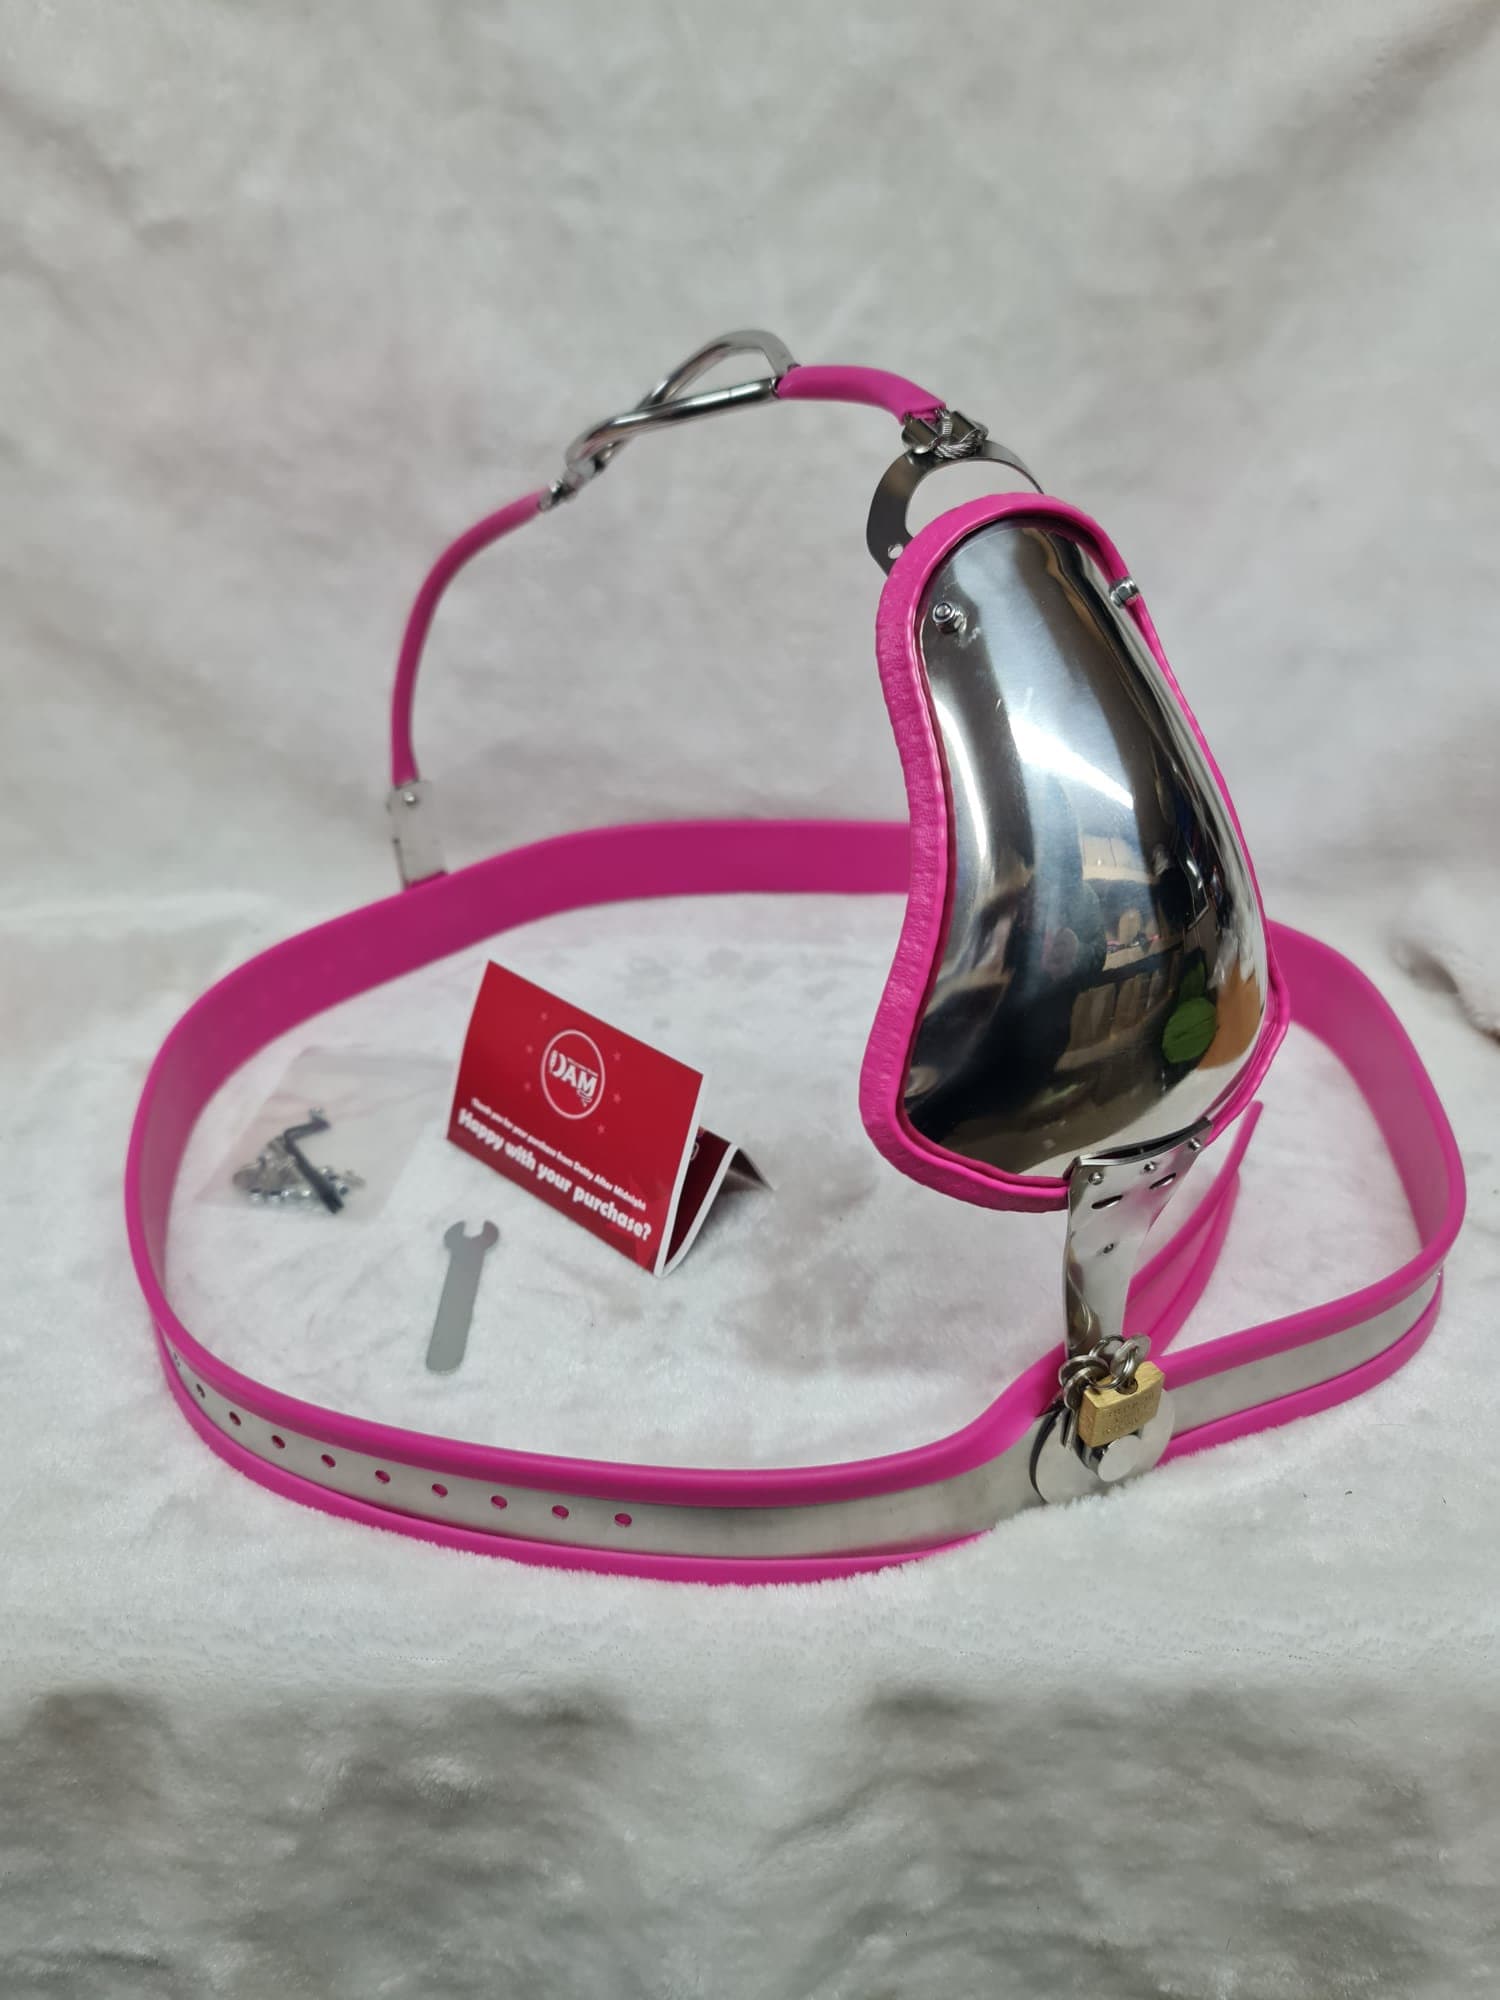 Full Male Stealth Chastity Belt Device With Solid Cage Kit Mature 